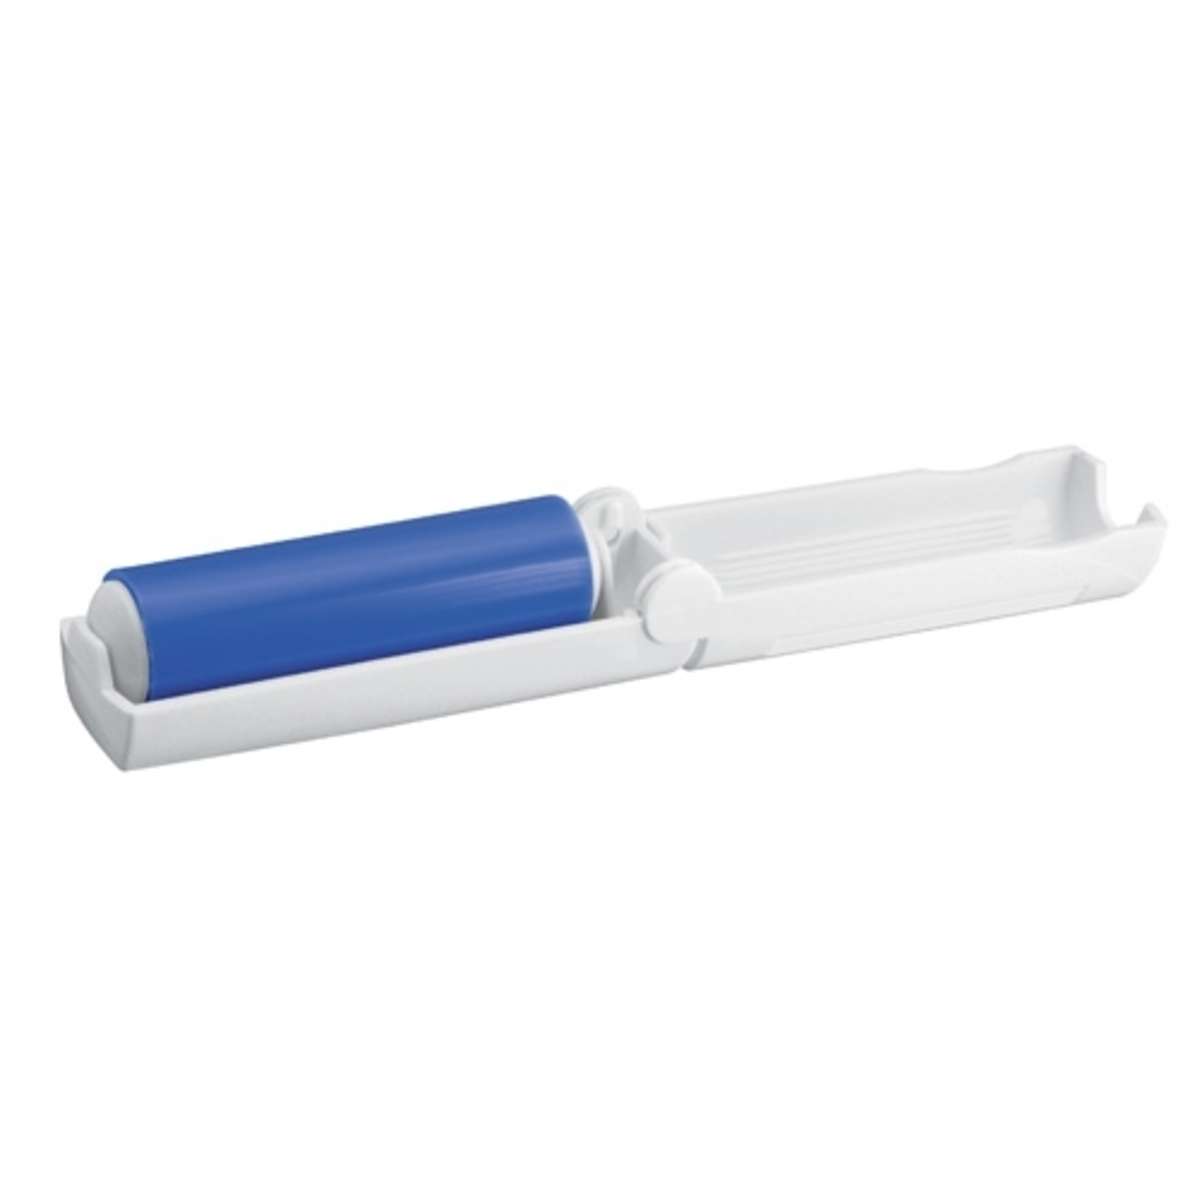 promotional lint roller